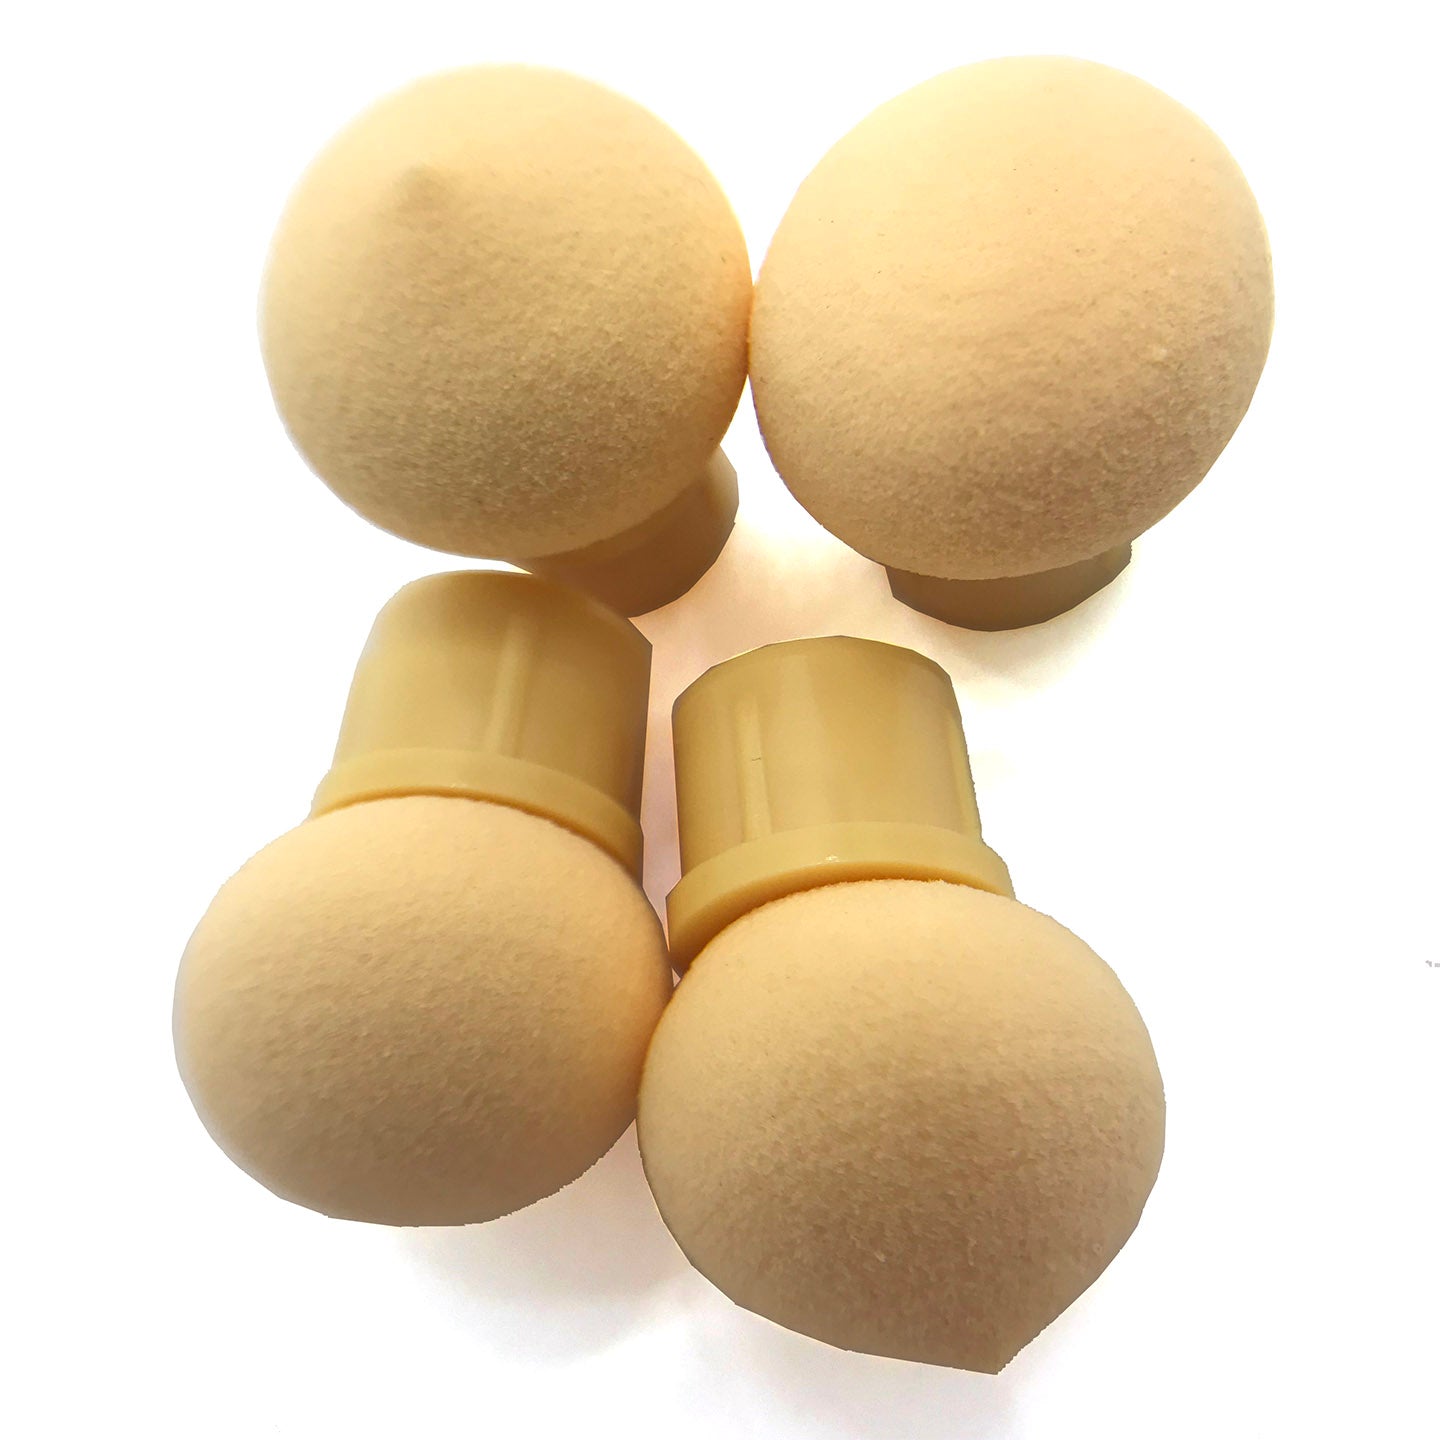 Tool - Puff Sponge Replacement Tips